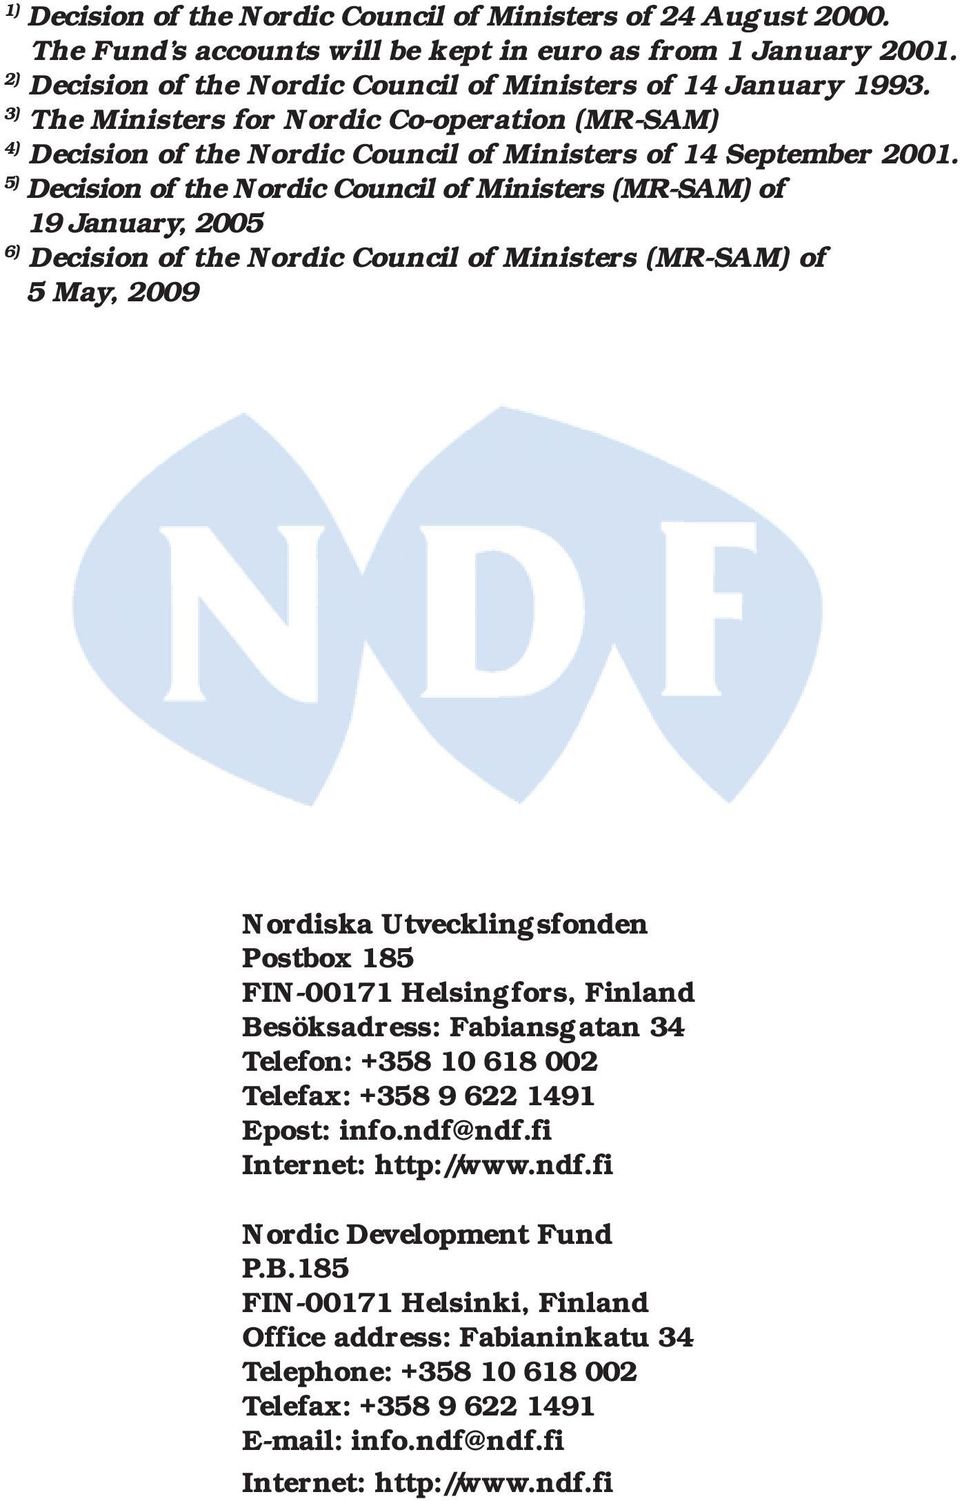 5) Decision of the Nordic Council of Ministers (MR-SAM) of 19 January, 2005 6) Decision of the Nordic Council of Ministers (MR-SAM) of 5 May, 2009 Nordiska Utvecklingsfonden Postbox 185 FIN-00171